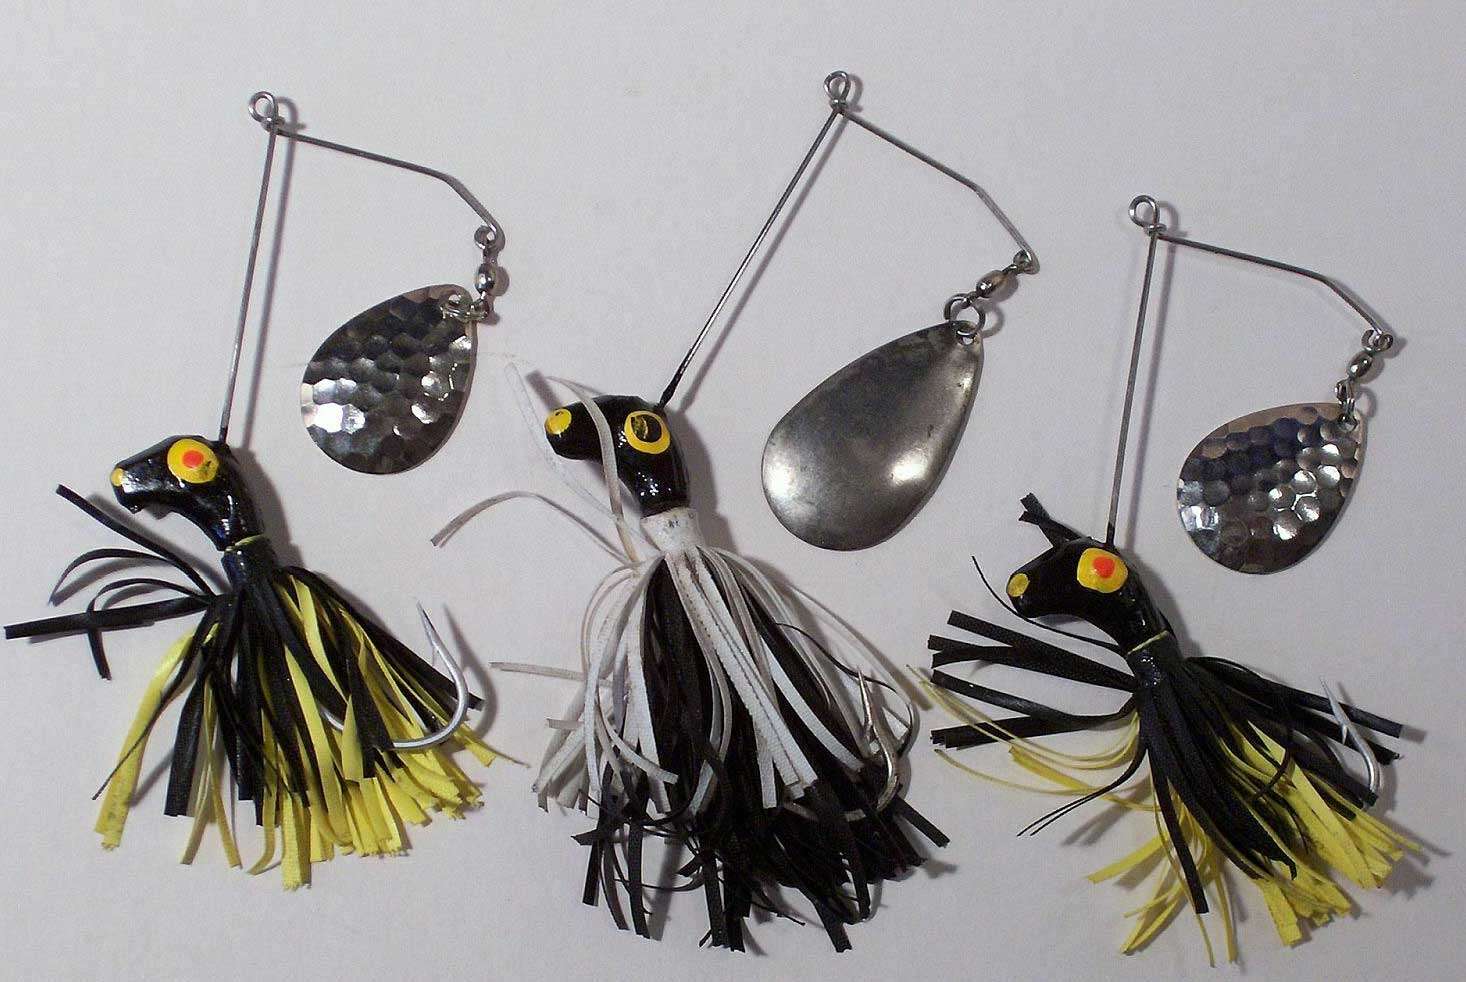 scorpion spinnerbait 1970's? - Fishing Tackle - Bass Fishing Forums